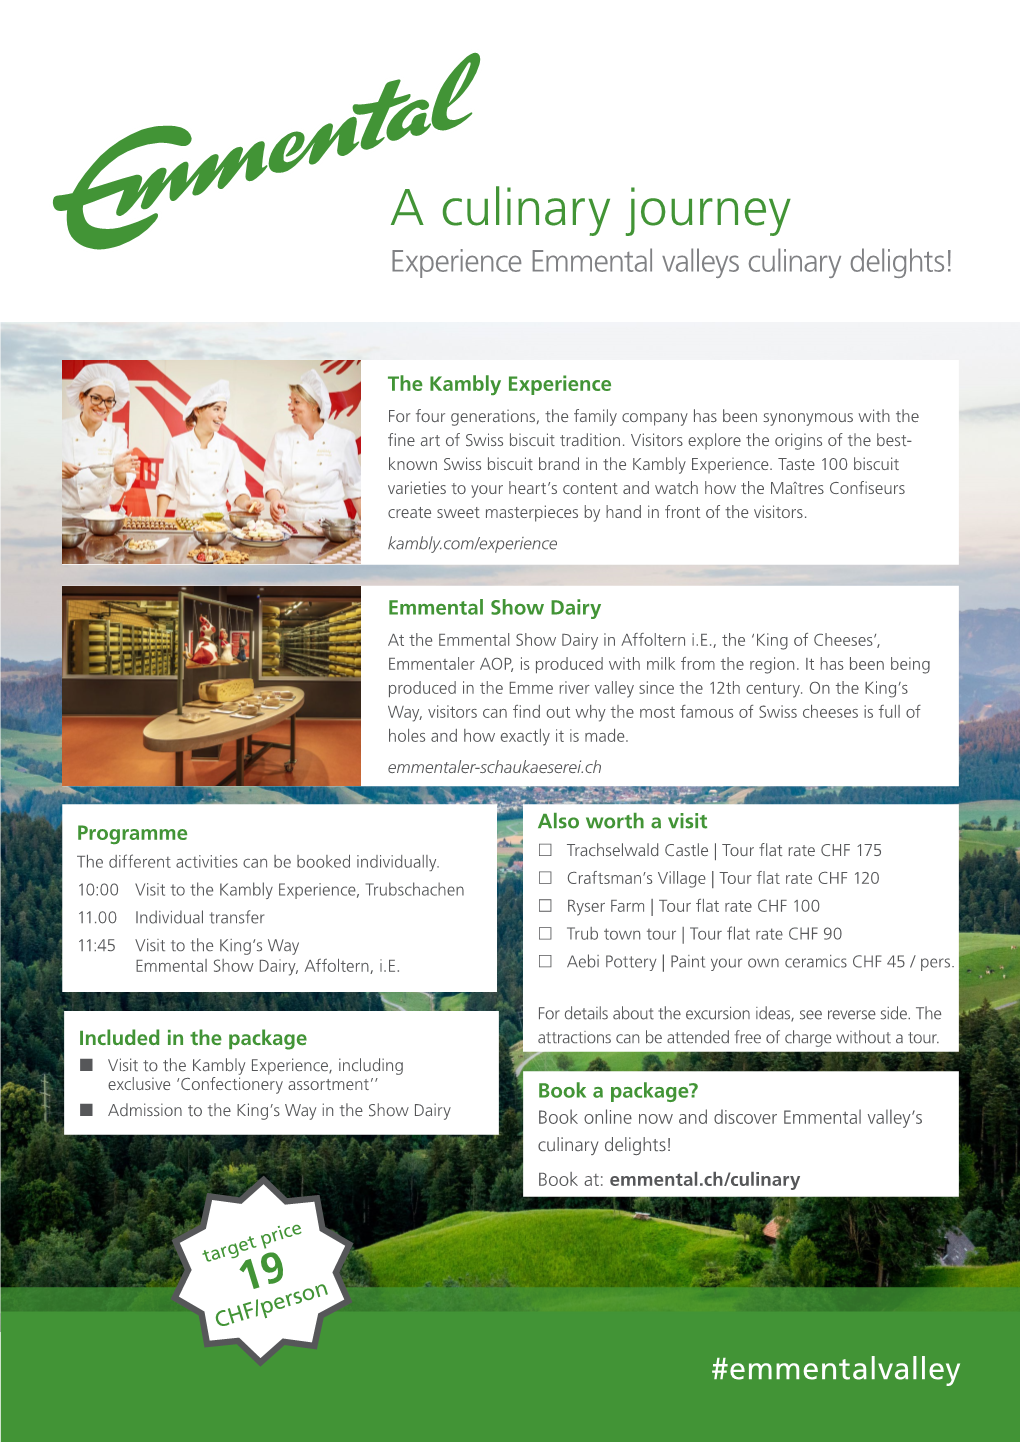 A Culinary Journey Experience Emmental Valleys Culinary Delights!